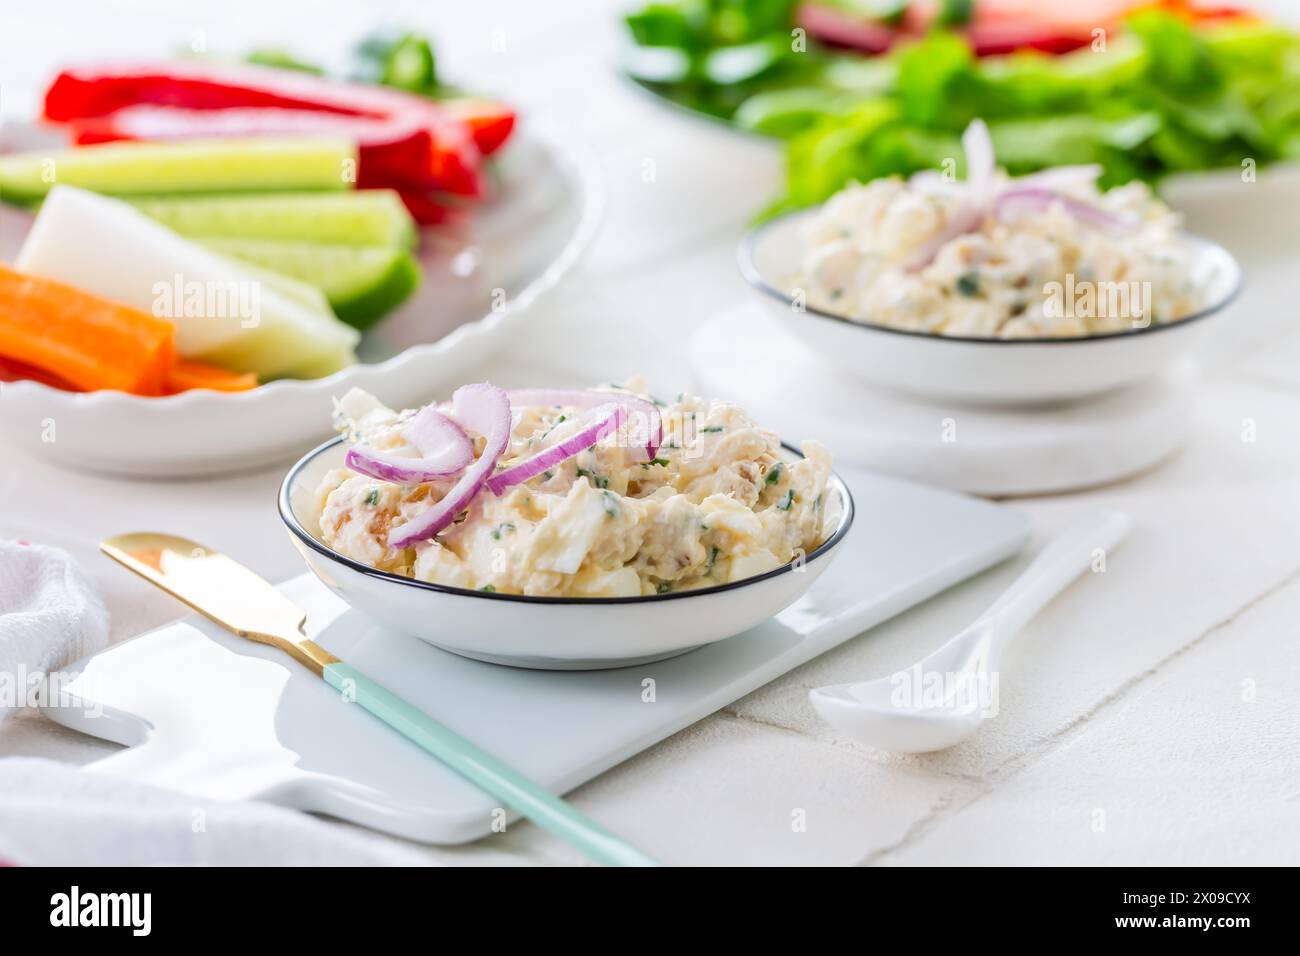 Fish and egg paste or salad with raw snack vegetables, healthy snack Stock Photo